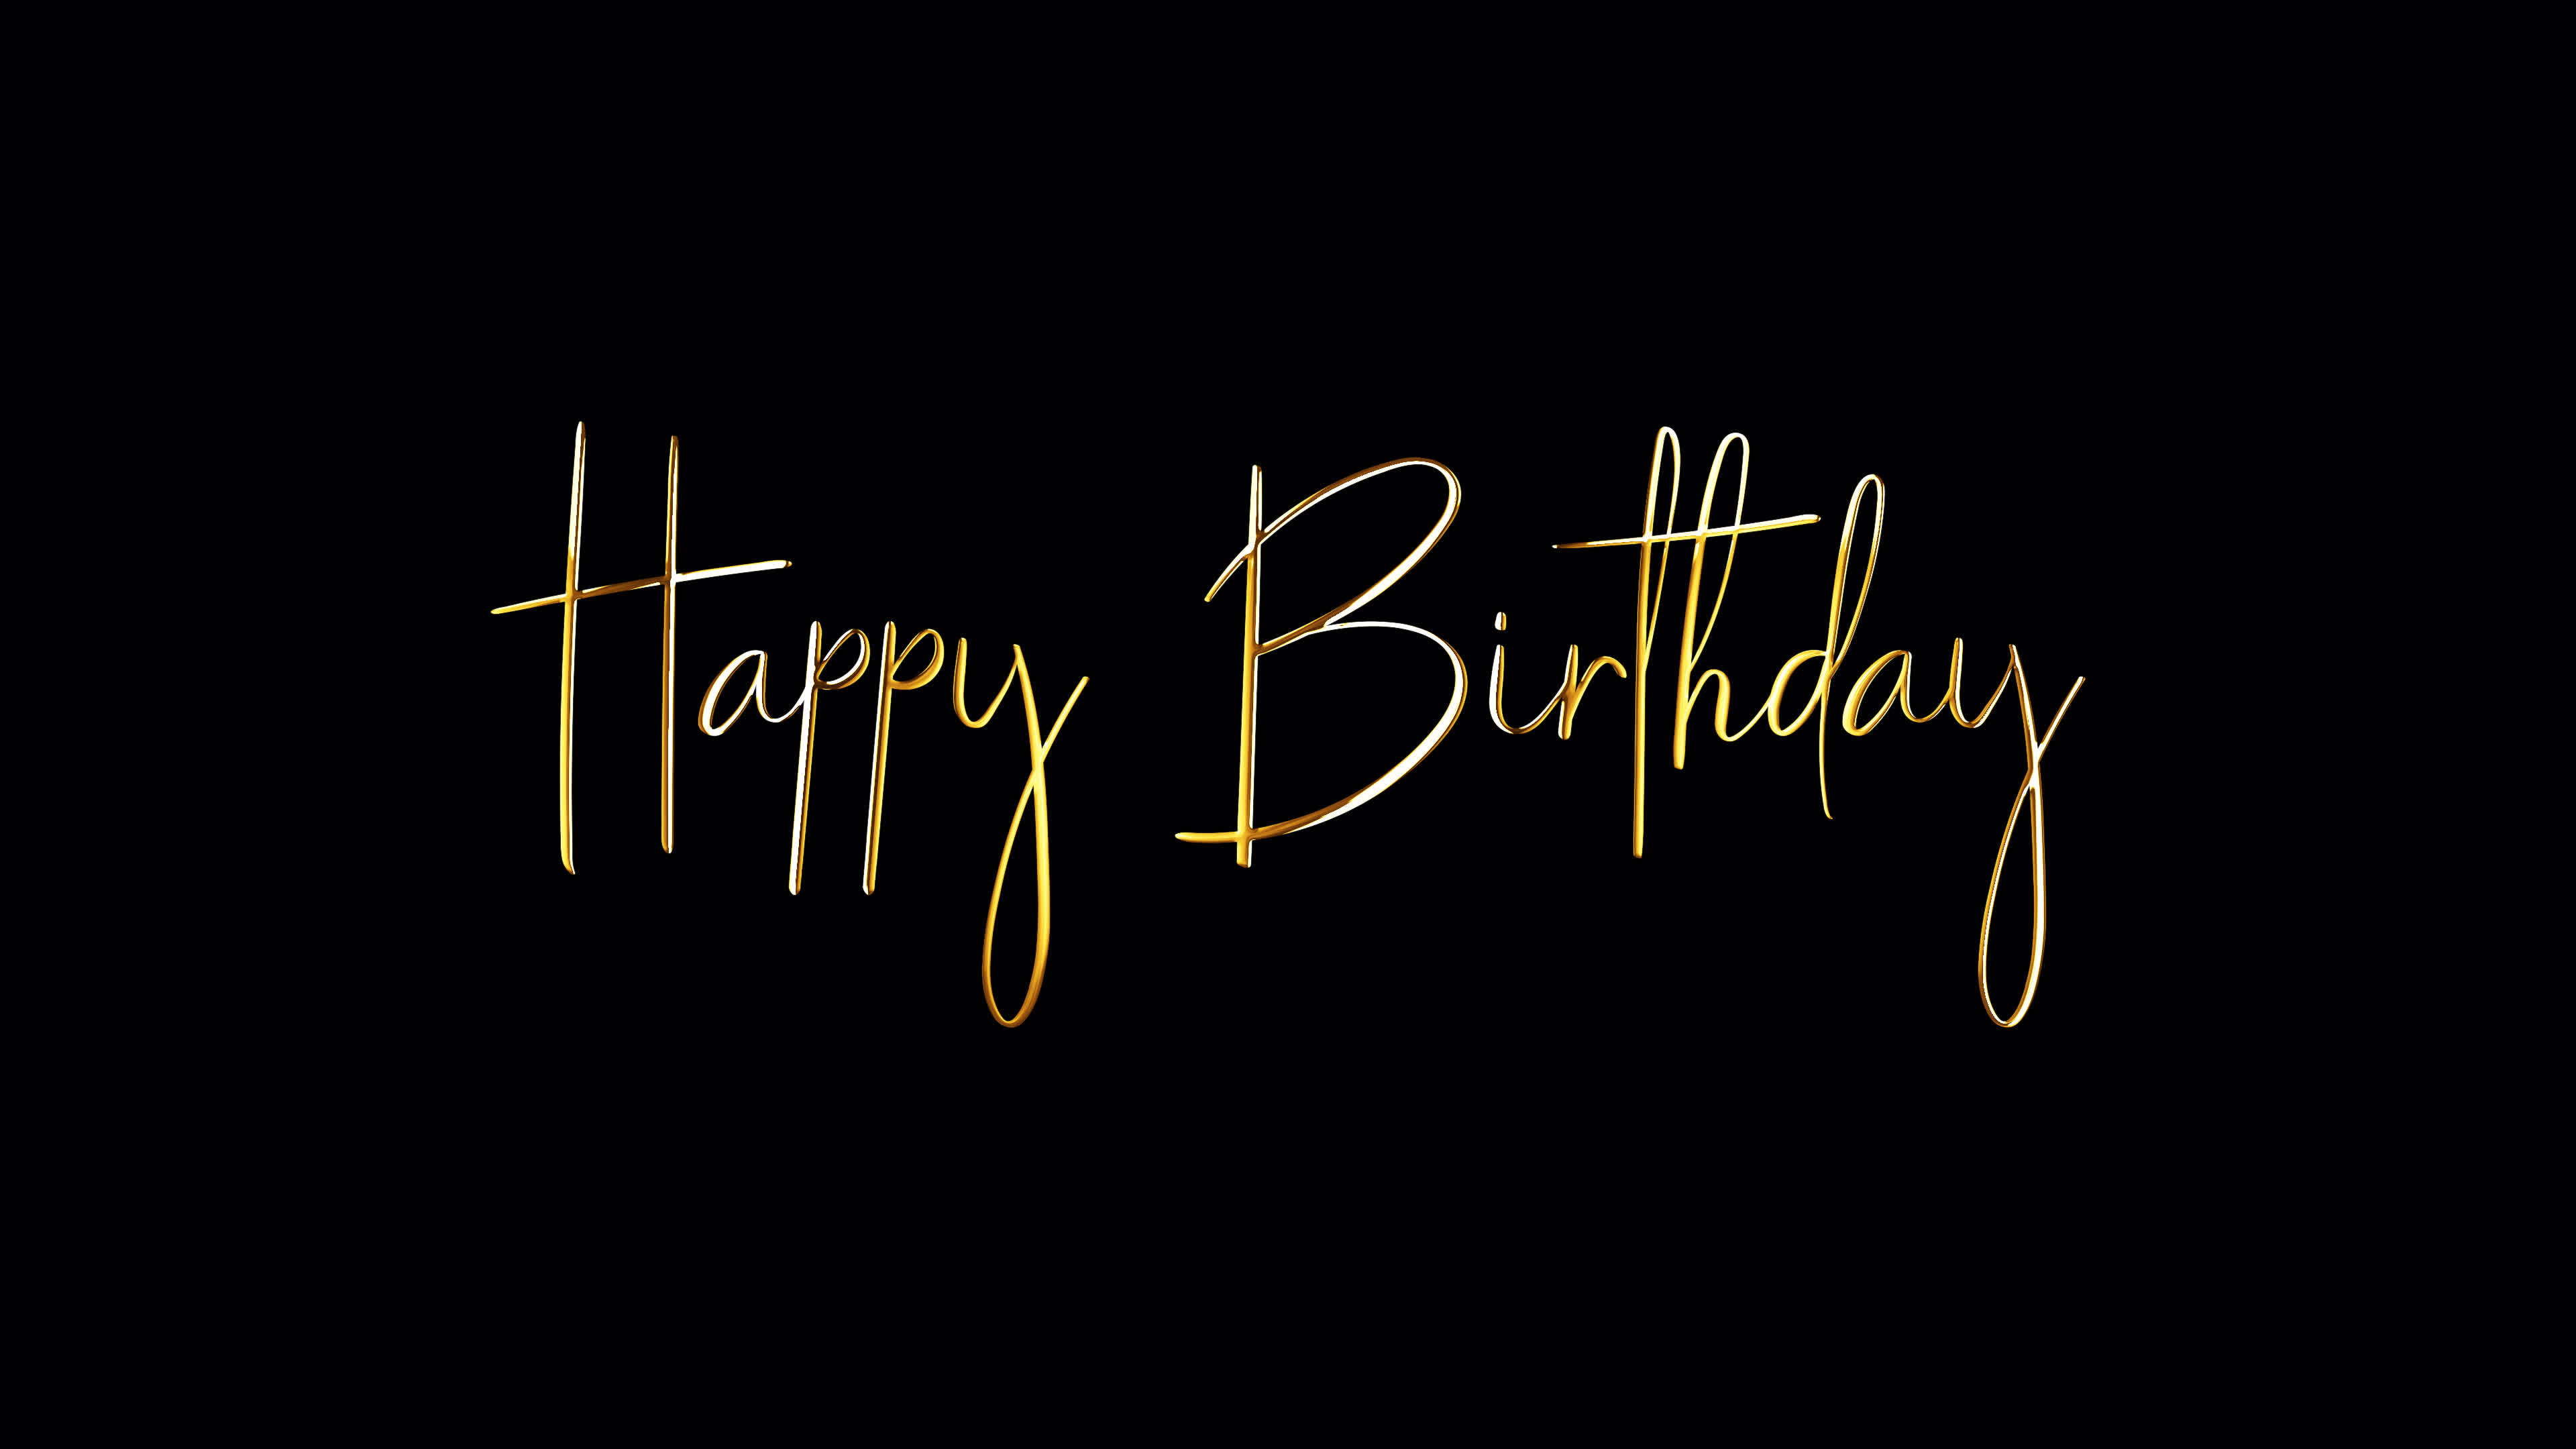 Birthday Background Stock Video Footage for Free Download